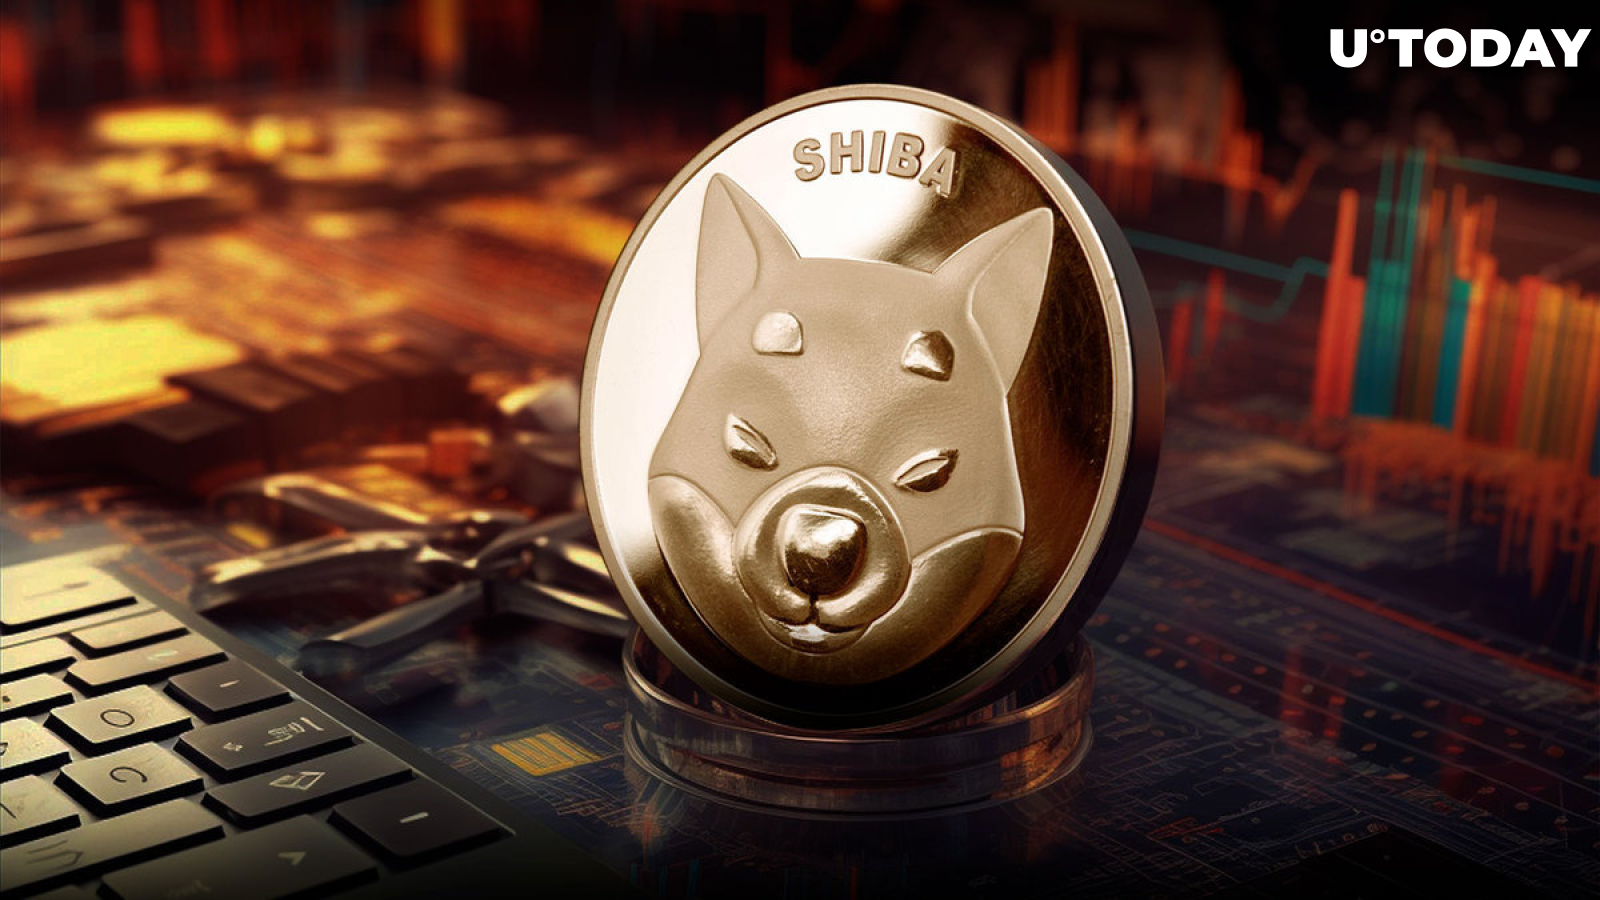 765 Billion Shiba Inu (SHIB) Tokens in 24 Hours: What's Happening?